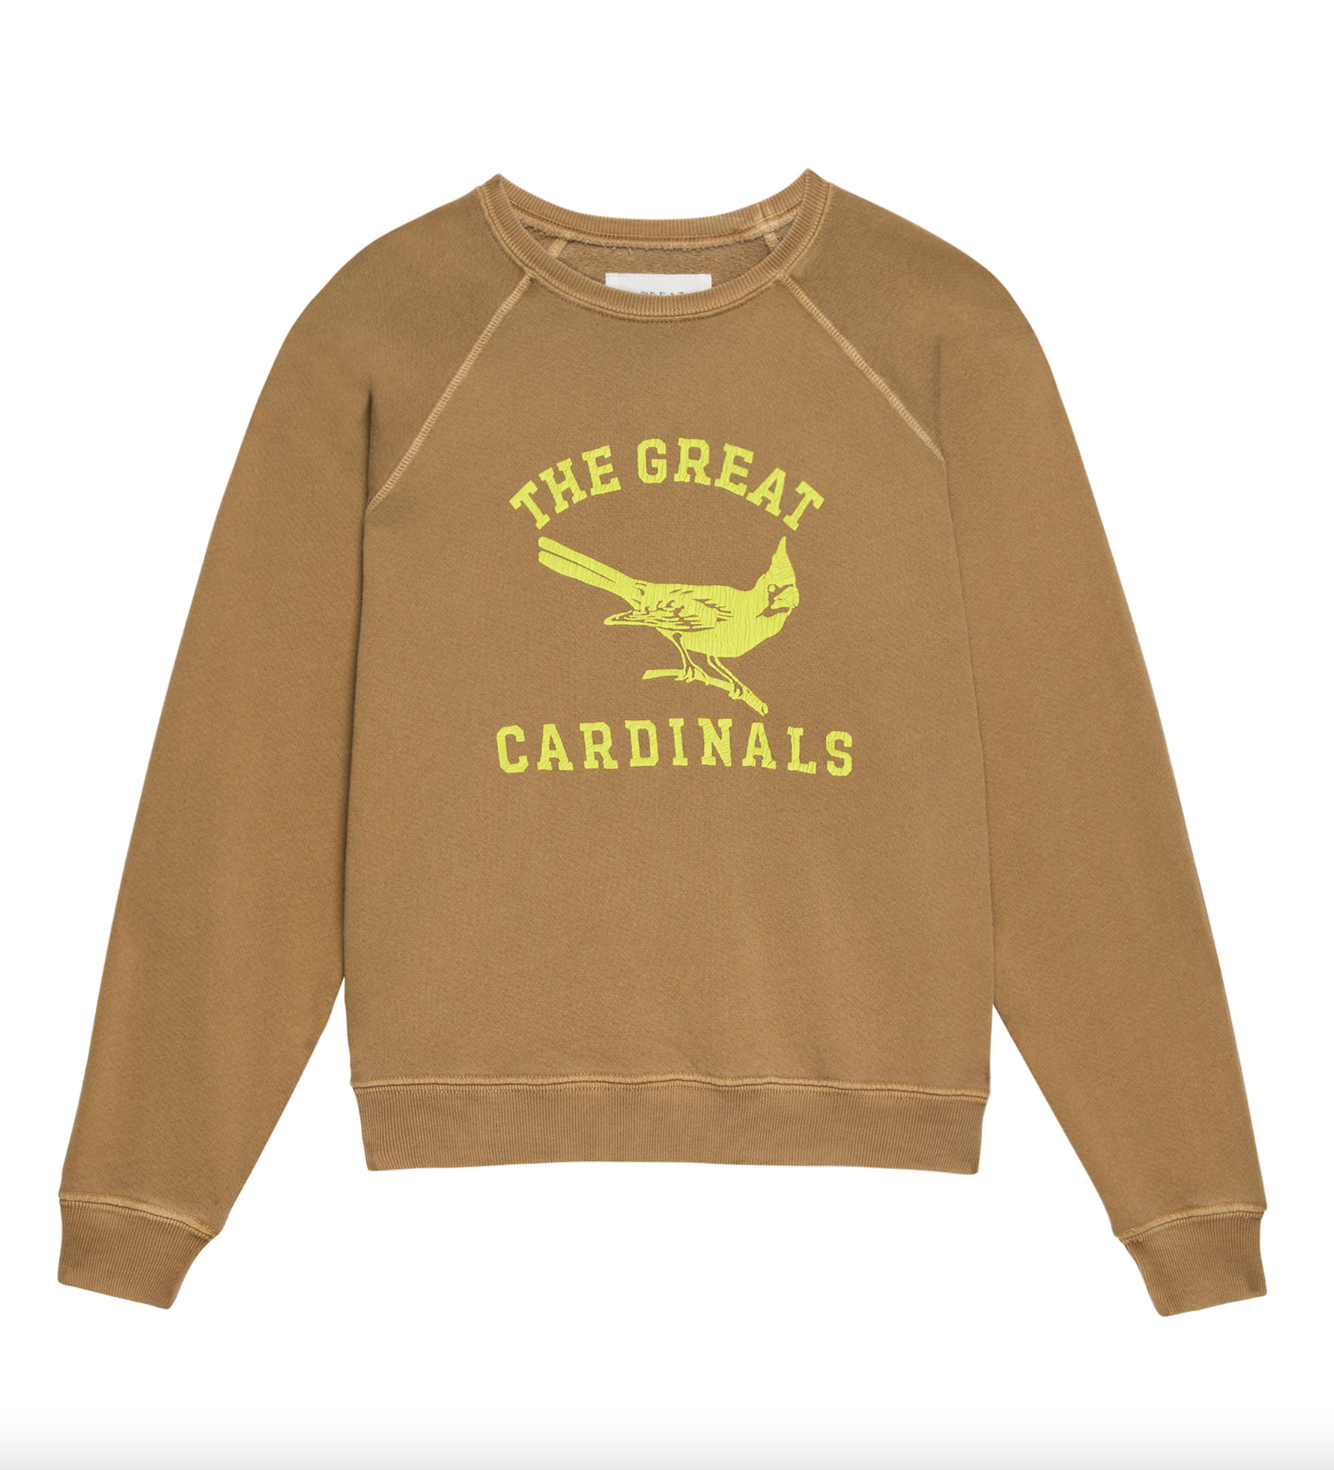 Brown Shrunken Sweatshirt with the text "THE GREAT CARDINALS" and an image of a bird in flight, isolated on a white background, reminiscent of Scottsdale Arizona by The Great Inc.